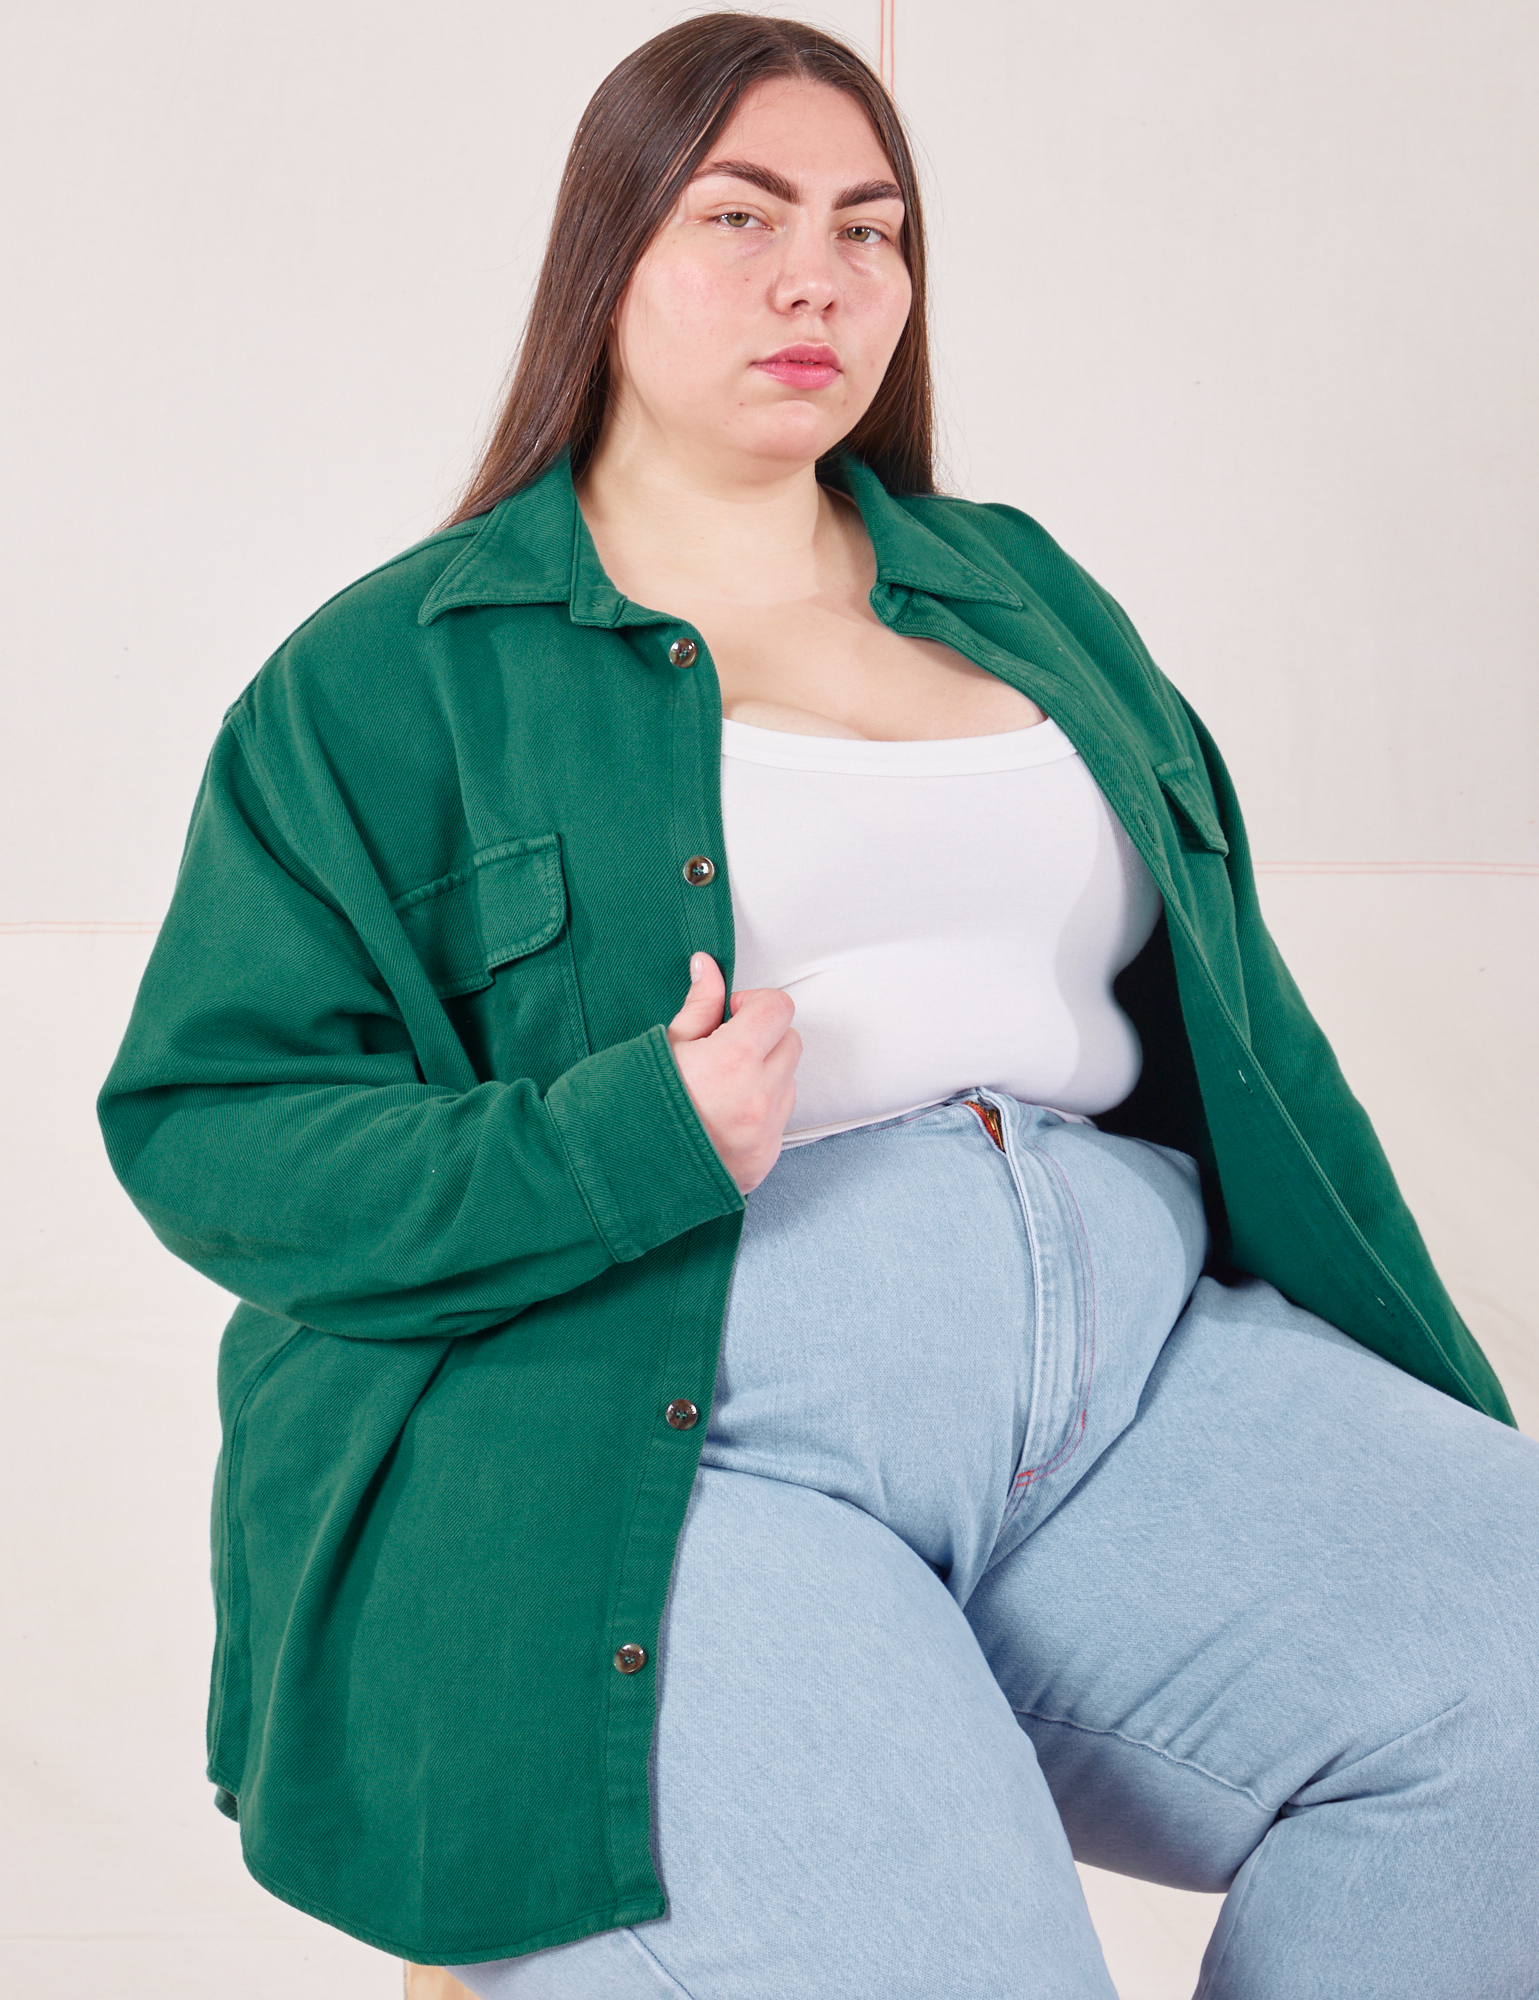 Marielena is wearing Flannel Overshirt in Hunter Green, vintage off-white Cropped Tank Top and light wash Trouser Jeans